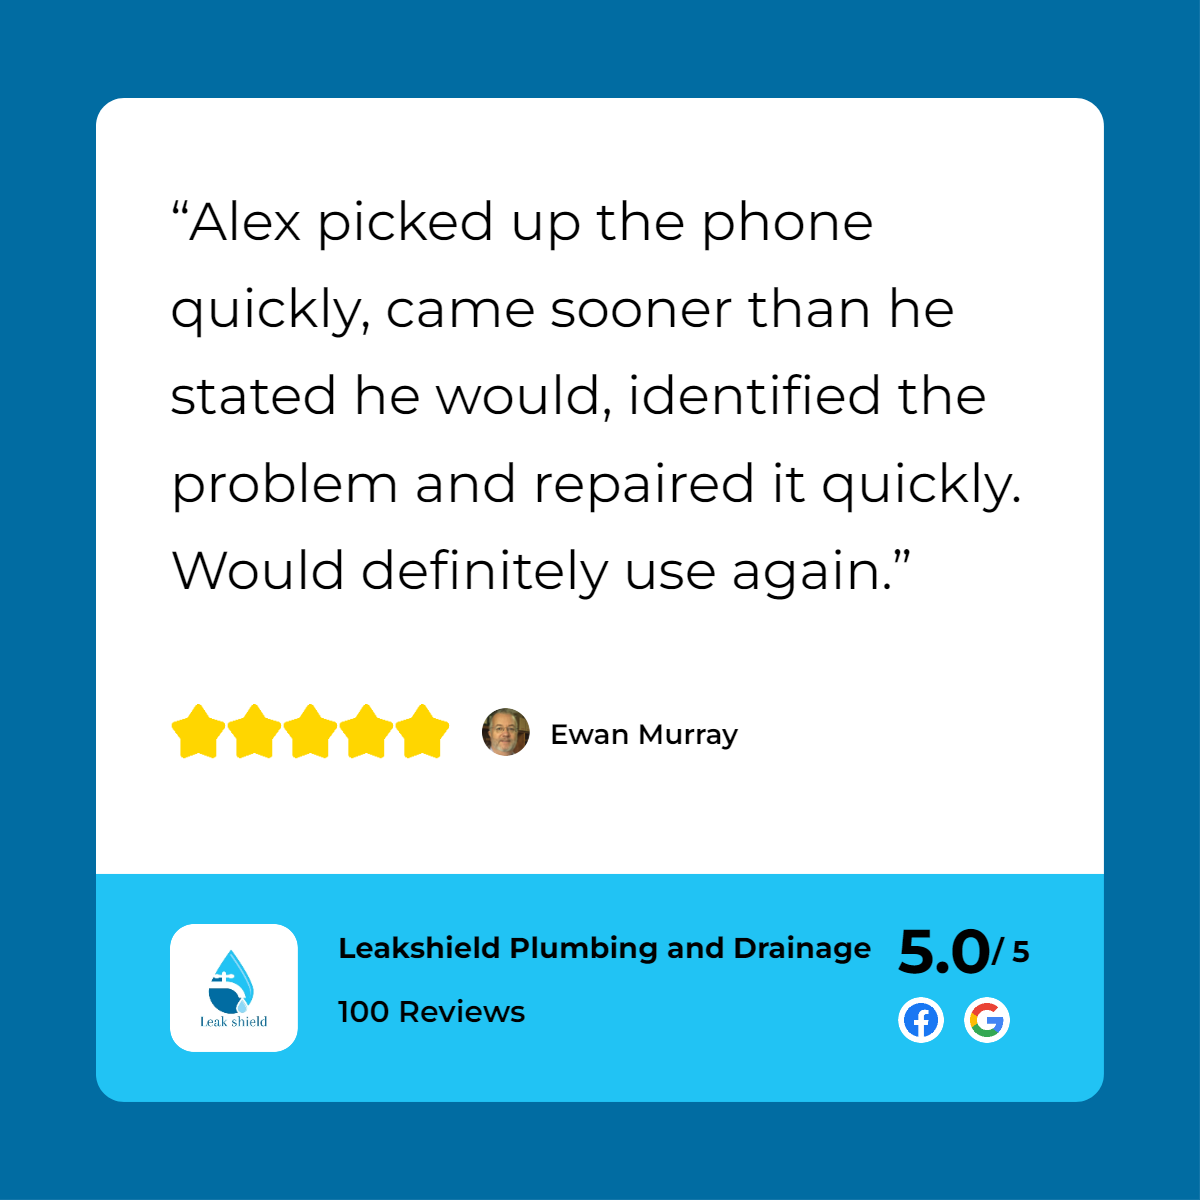 Leeds plumbing review - alex picked up the phone quickly came scanner he stated he would be repaired quickly.